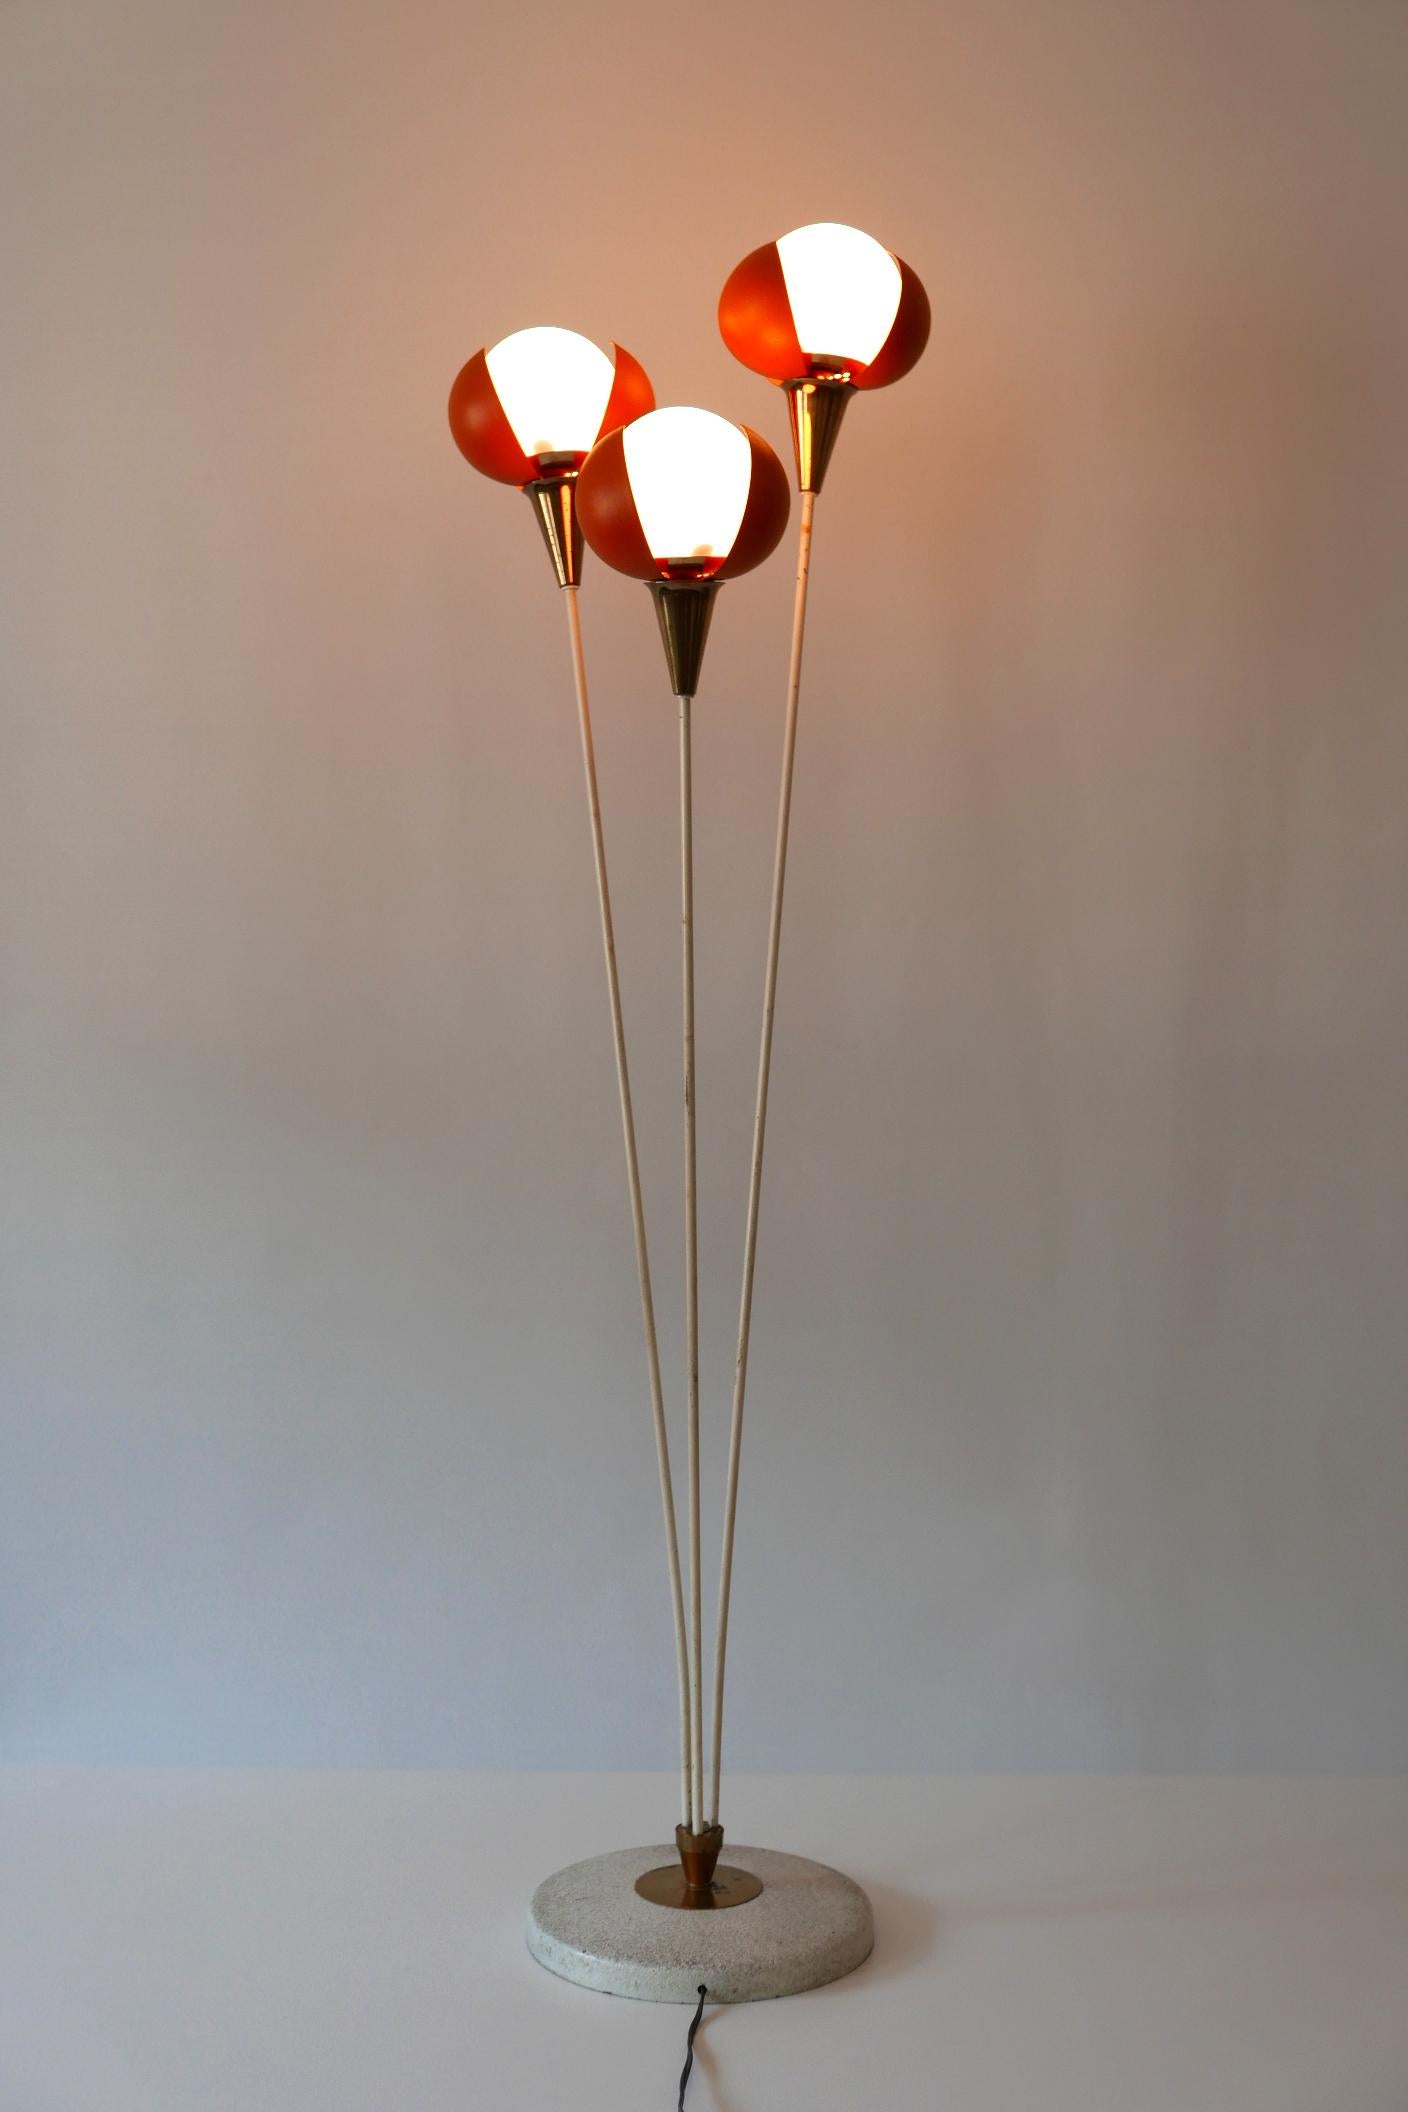 Amazing Mid-Century Modern Three-Flamed Floor Lamp Buds, 1950s, France For Sale 6